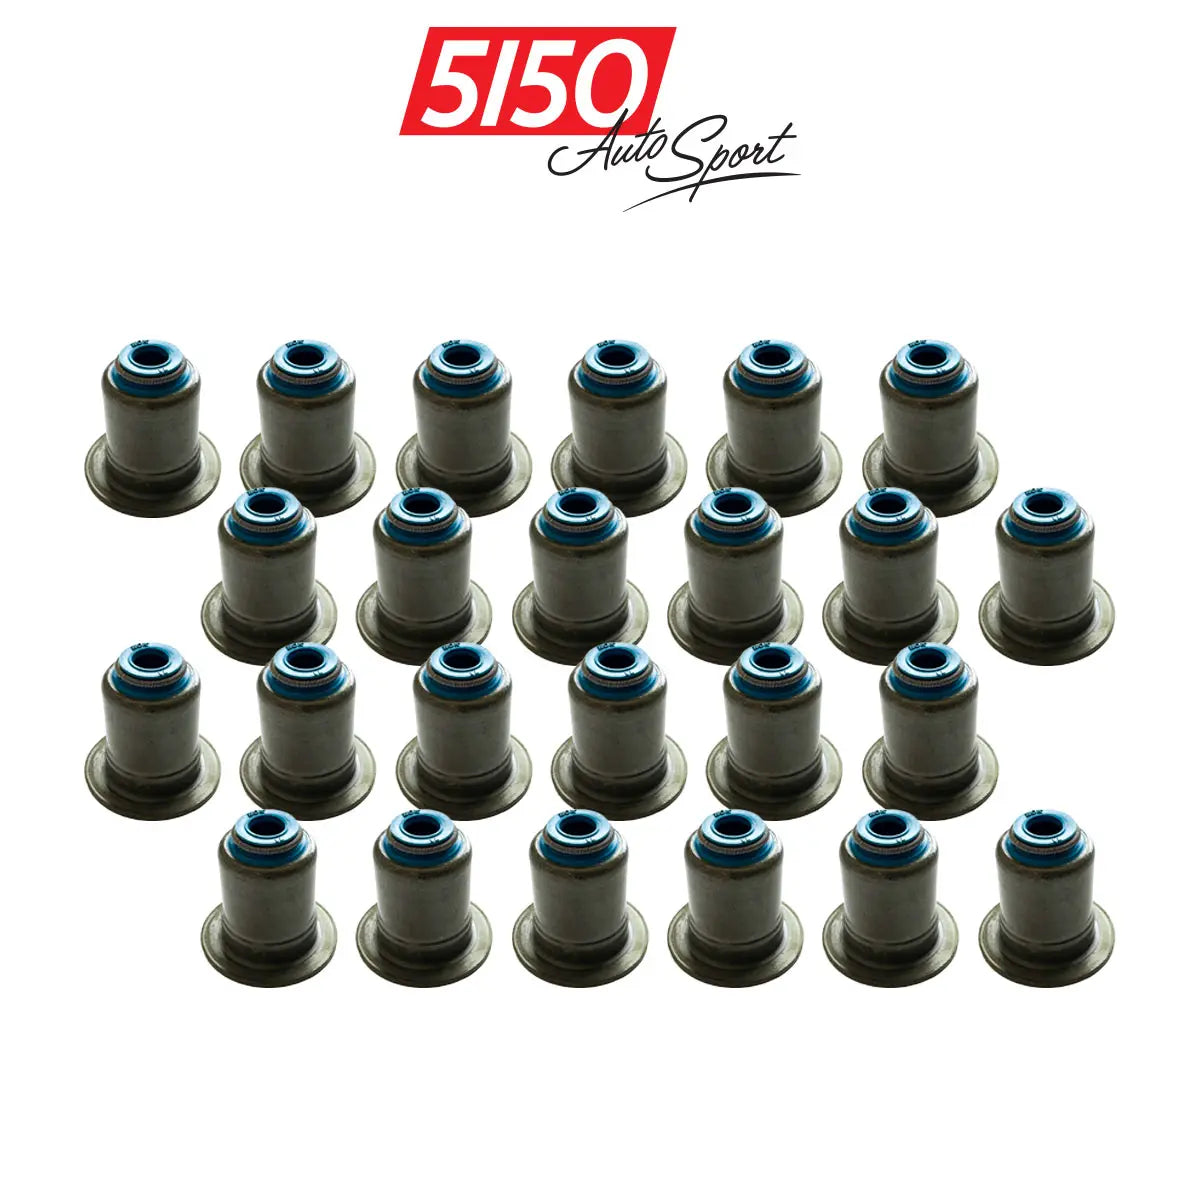 BMW S58 Valve Stem Seals for High Performance Cylinder Head Modifications